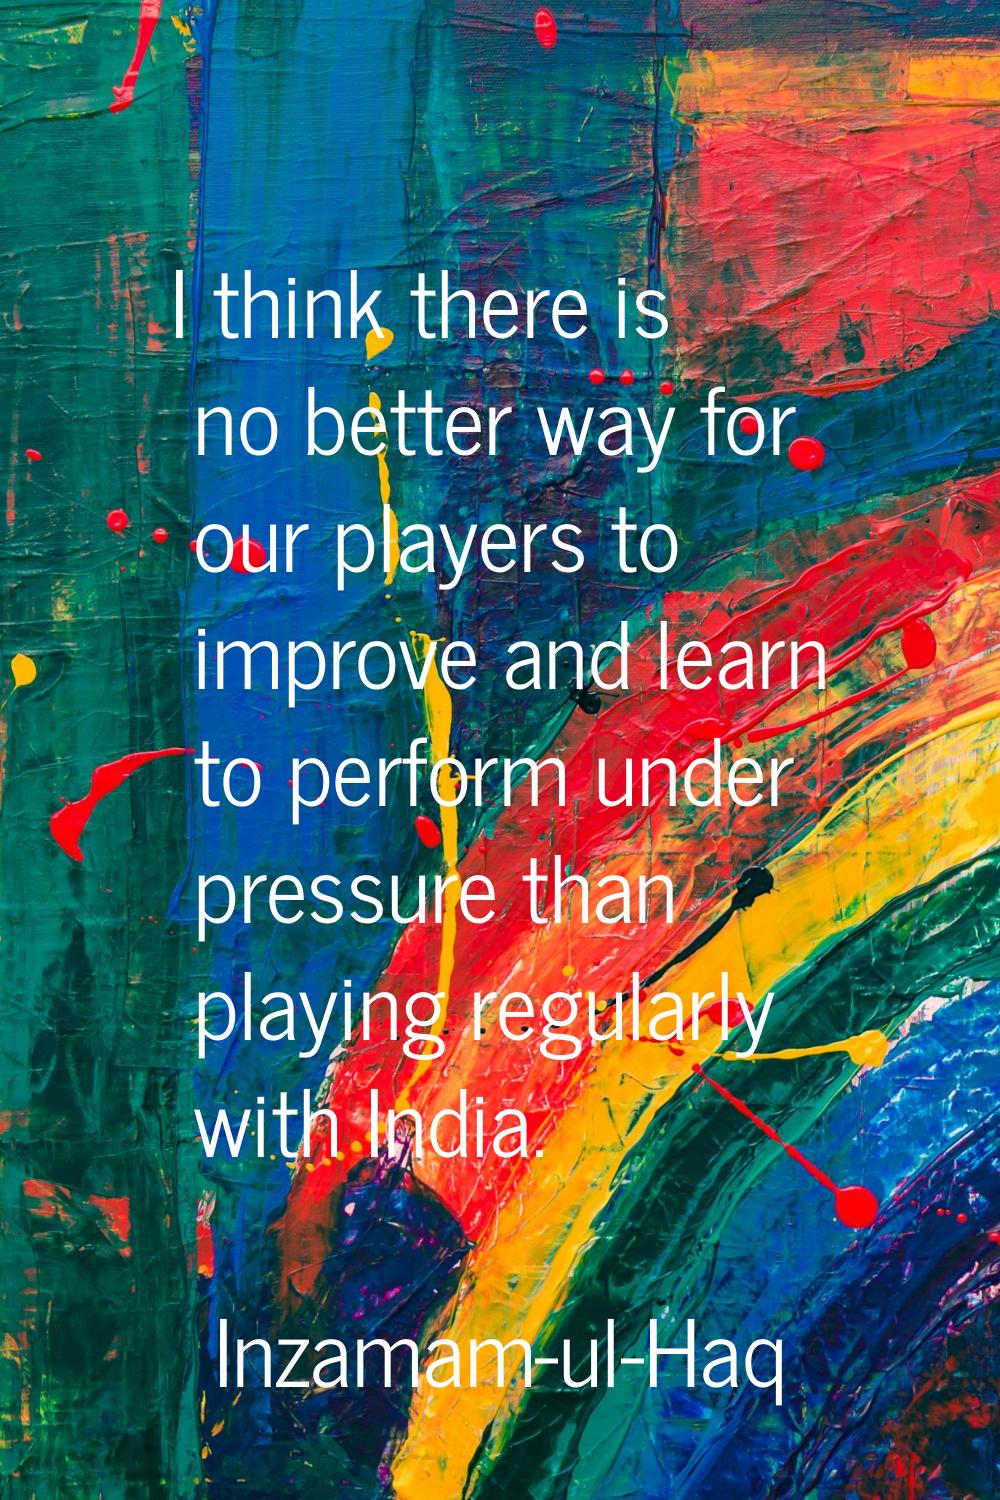 I think there is no better way for our players to improve and learn to perform under pressure than 